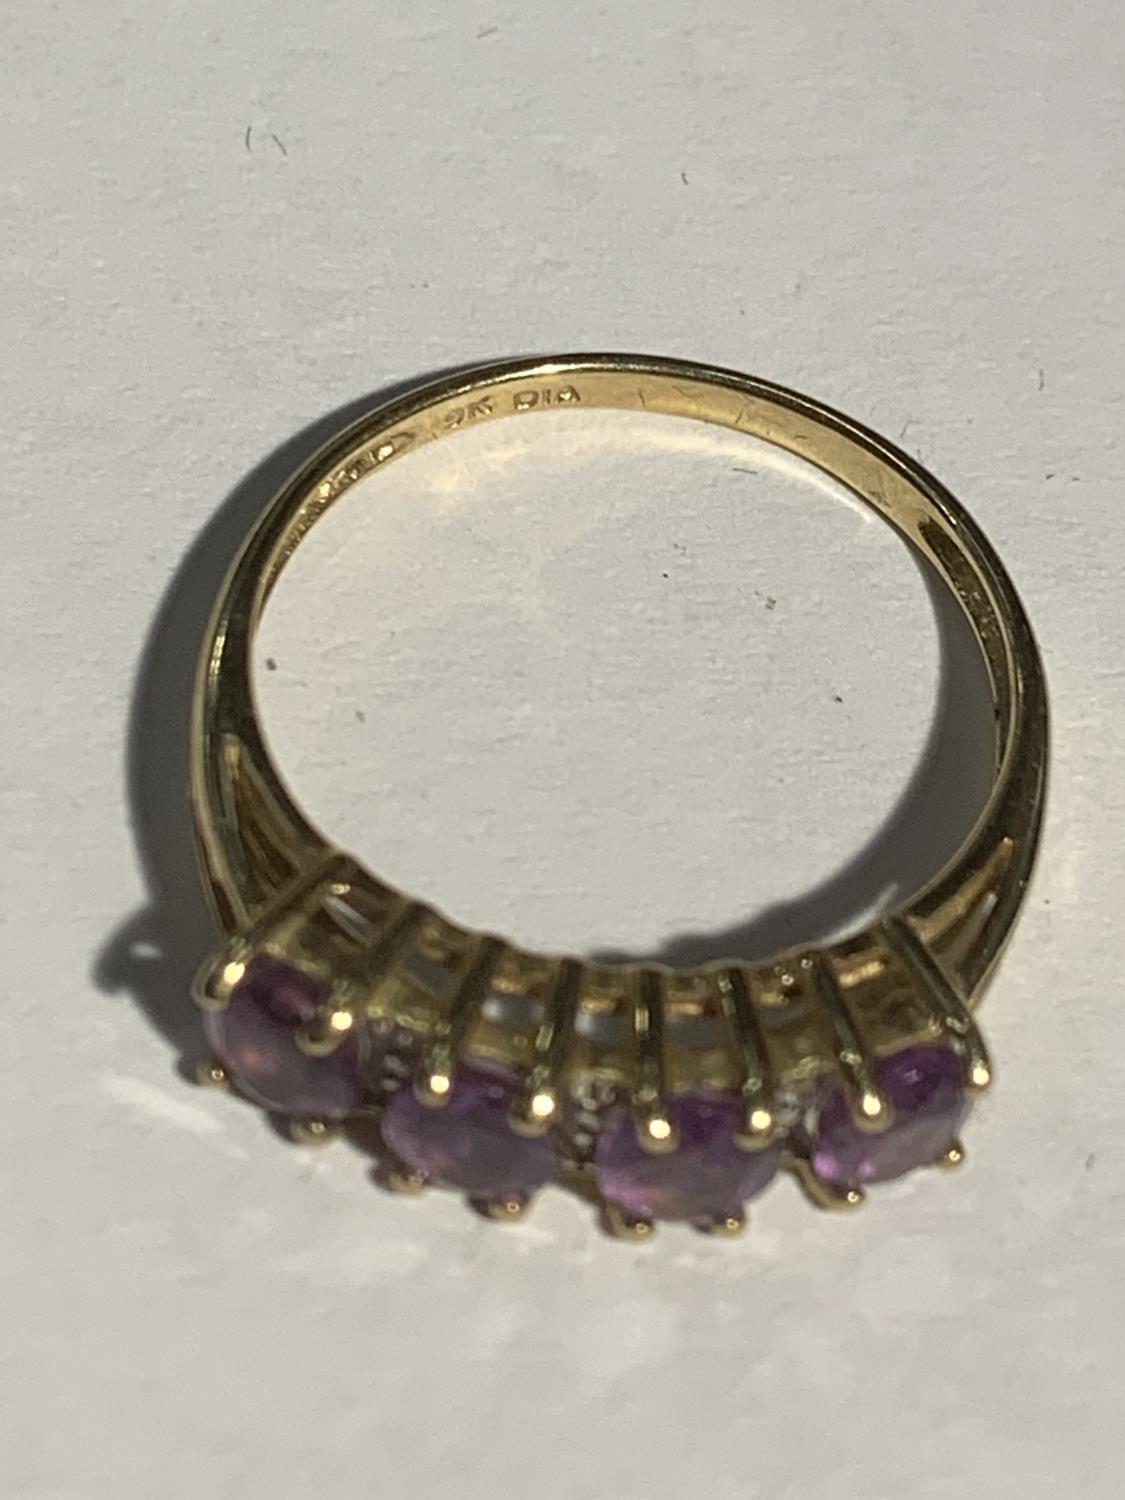 A 9 CARAT GOLD RING WITH FOUR IN LINE PURPLE STONES SIZE P GROSS WEIGHT 2.1 GRAMS - Image 3 of 3